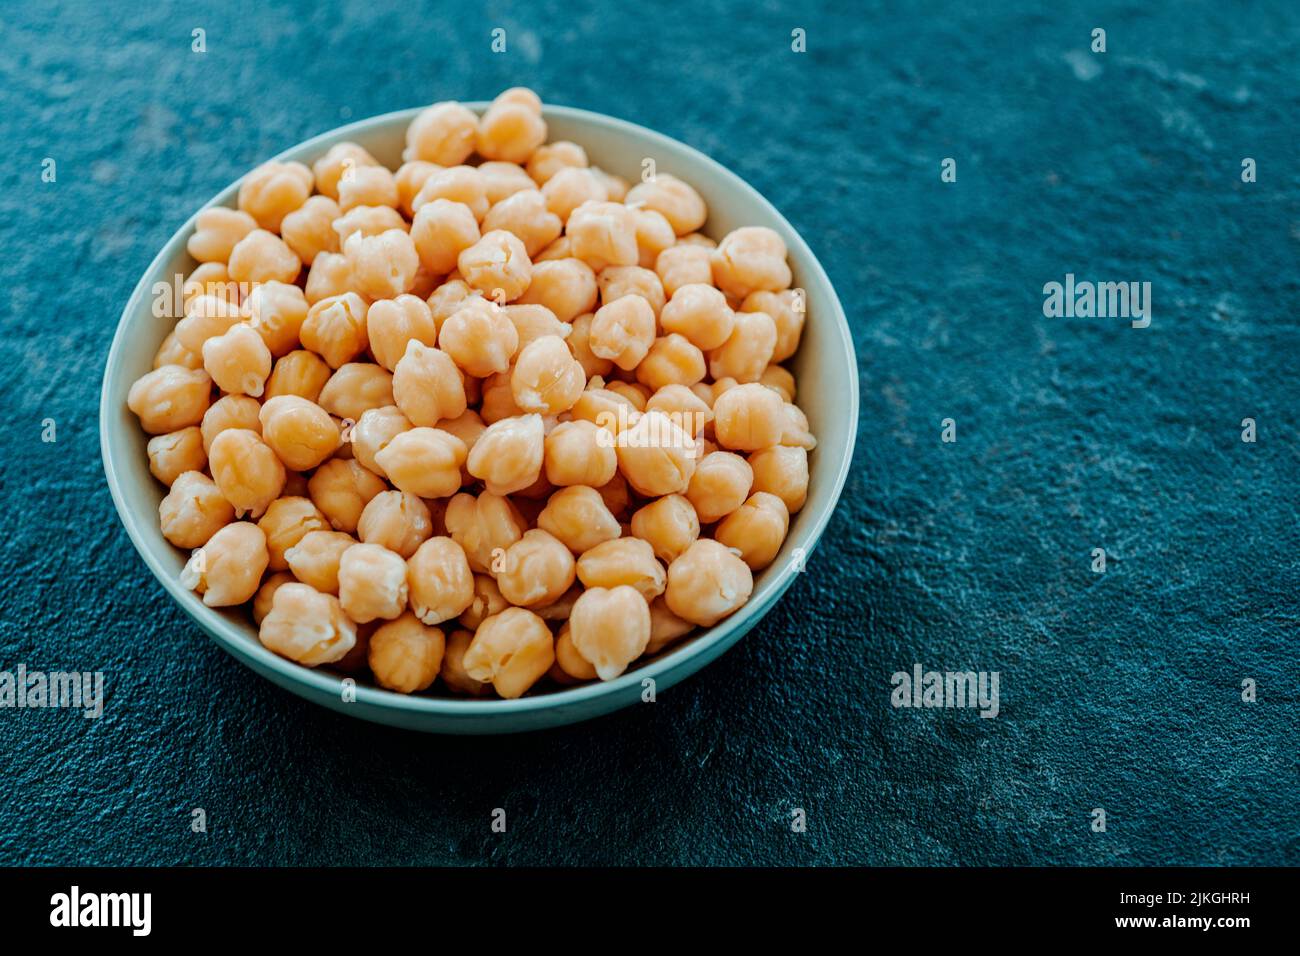 closeup of a ceramic bowl with some cooked chickpeas, on a dark stone surface Stock Photo